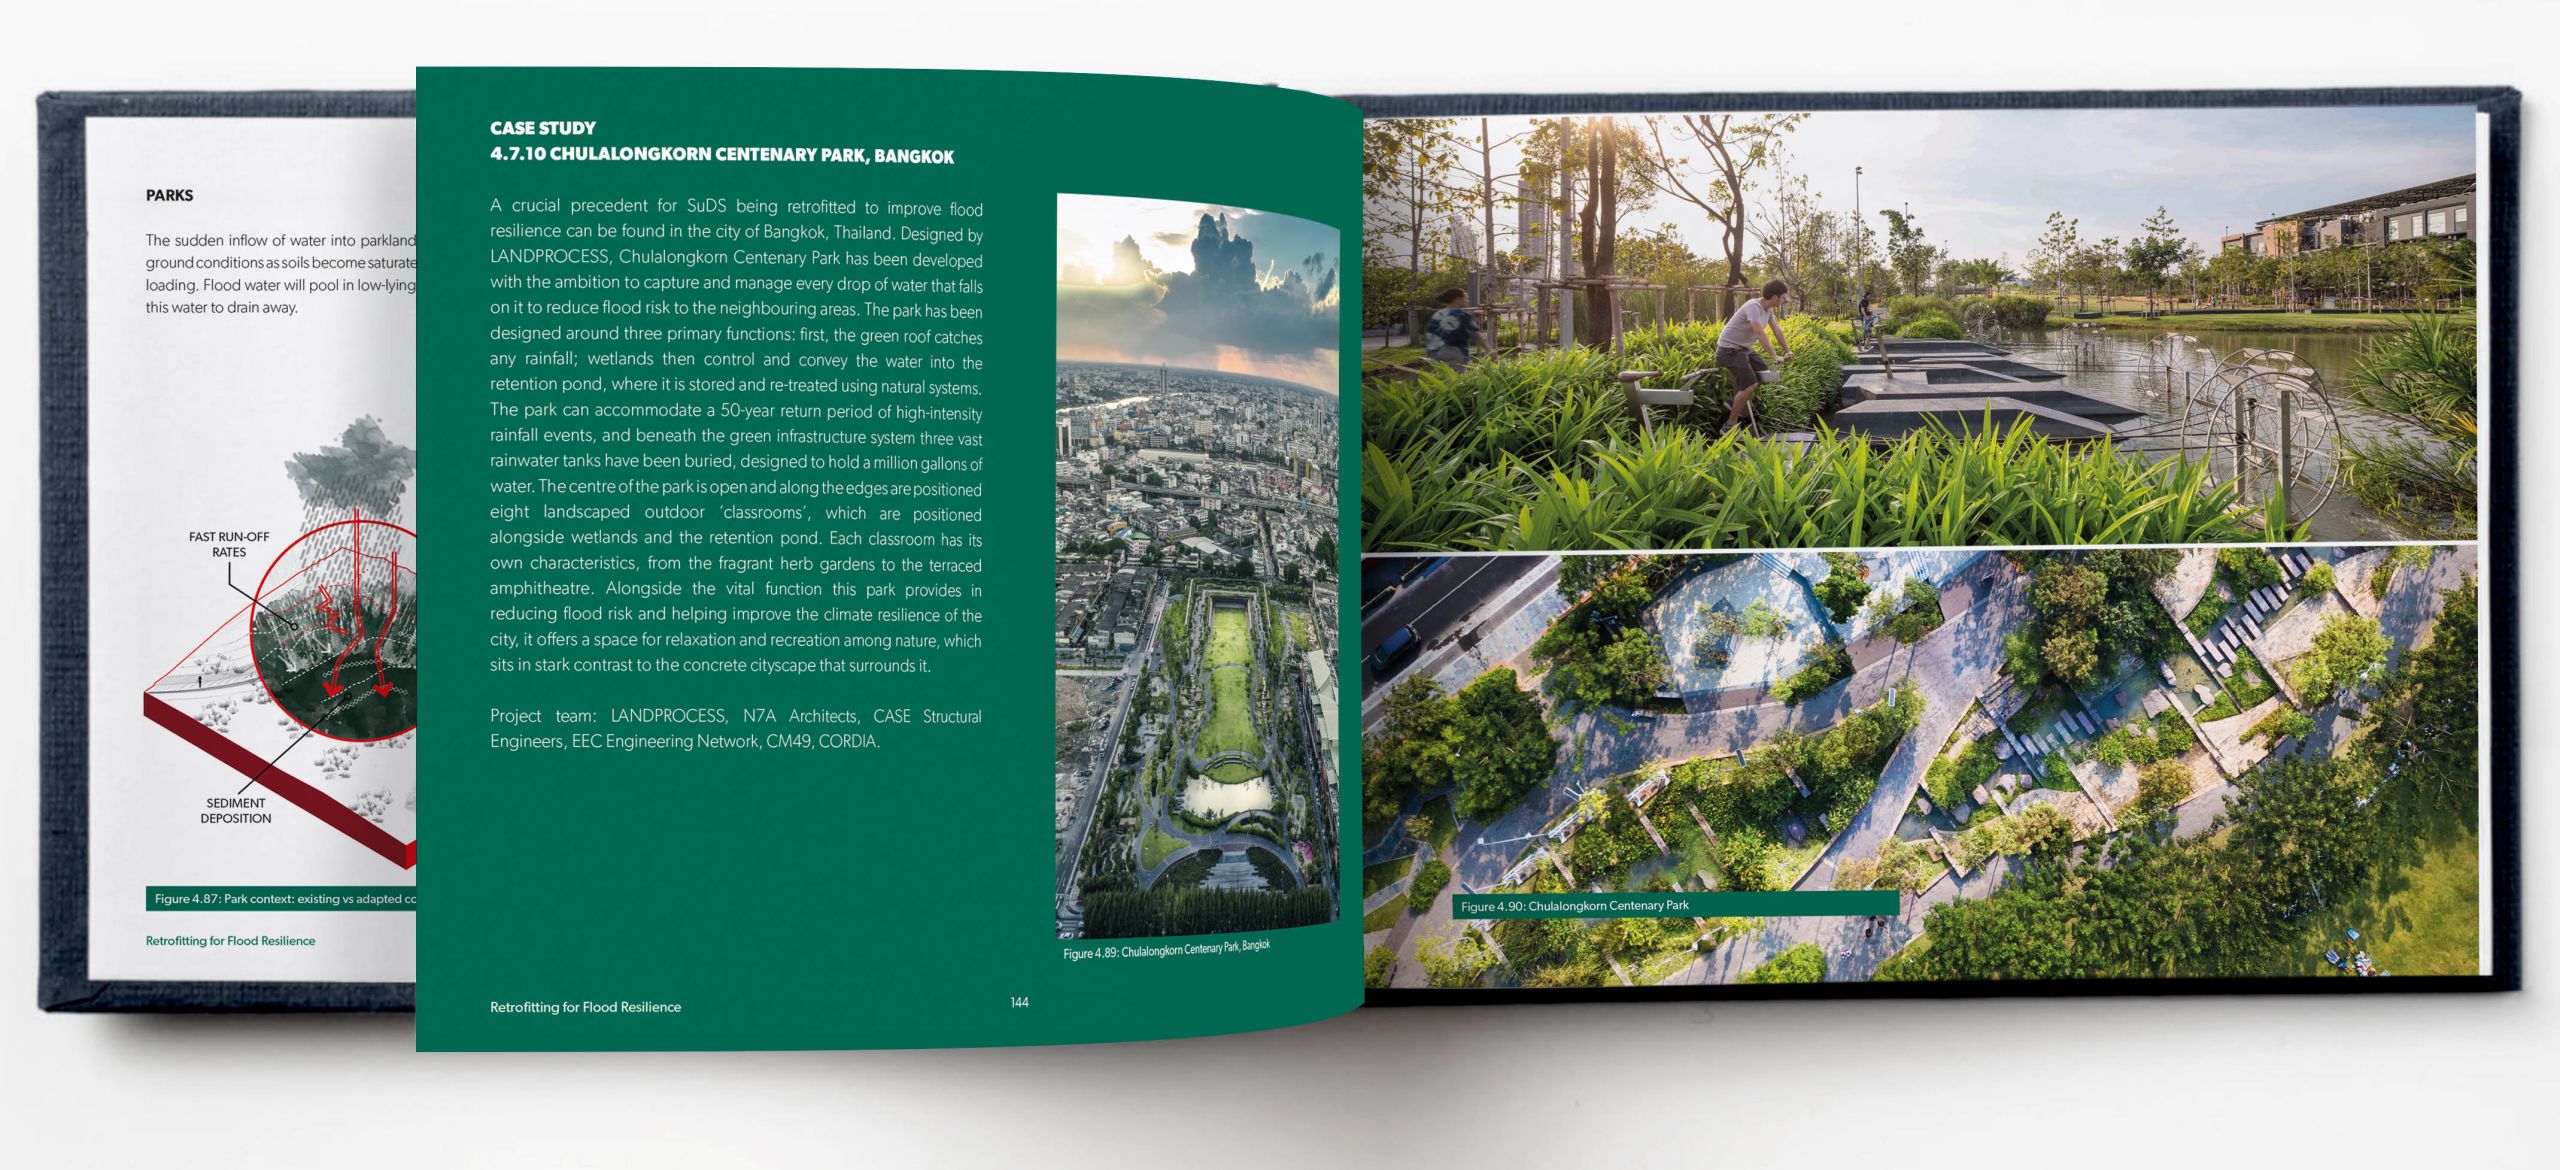 CU Centenary Park in Bangkok by Landprocess, featured in Retrofitting for Flood Resilience. © Edward Barsley & Landprocess